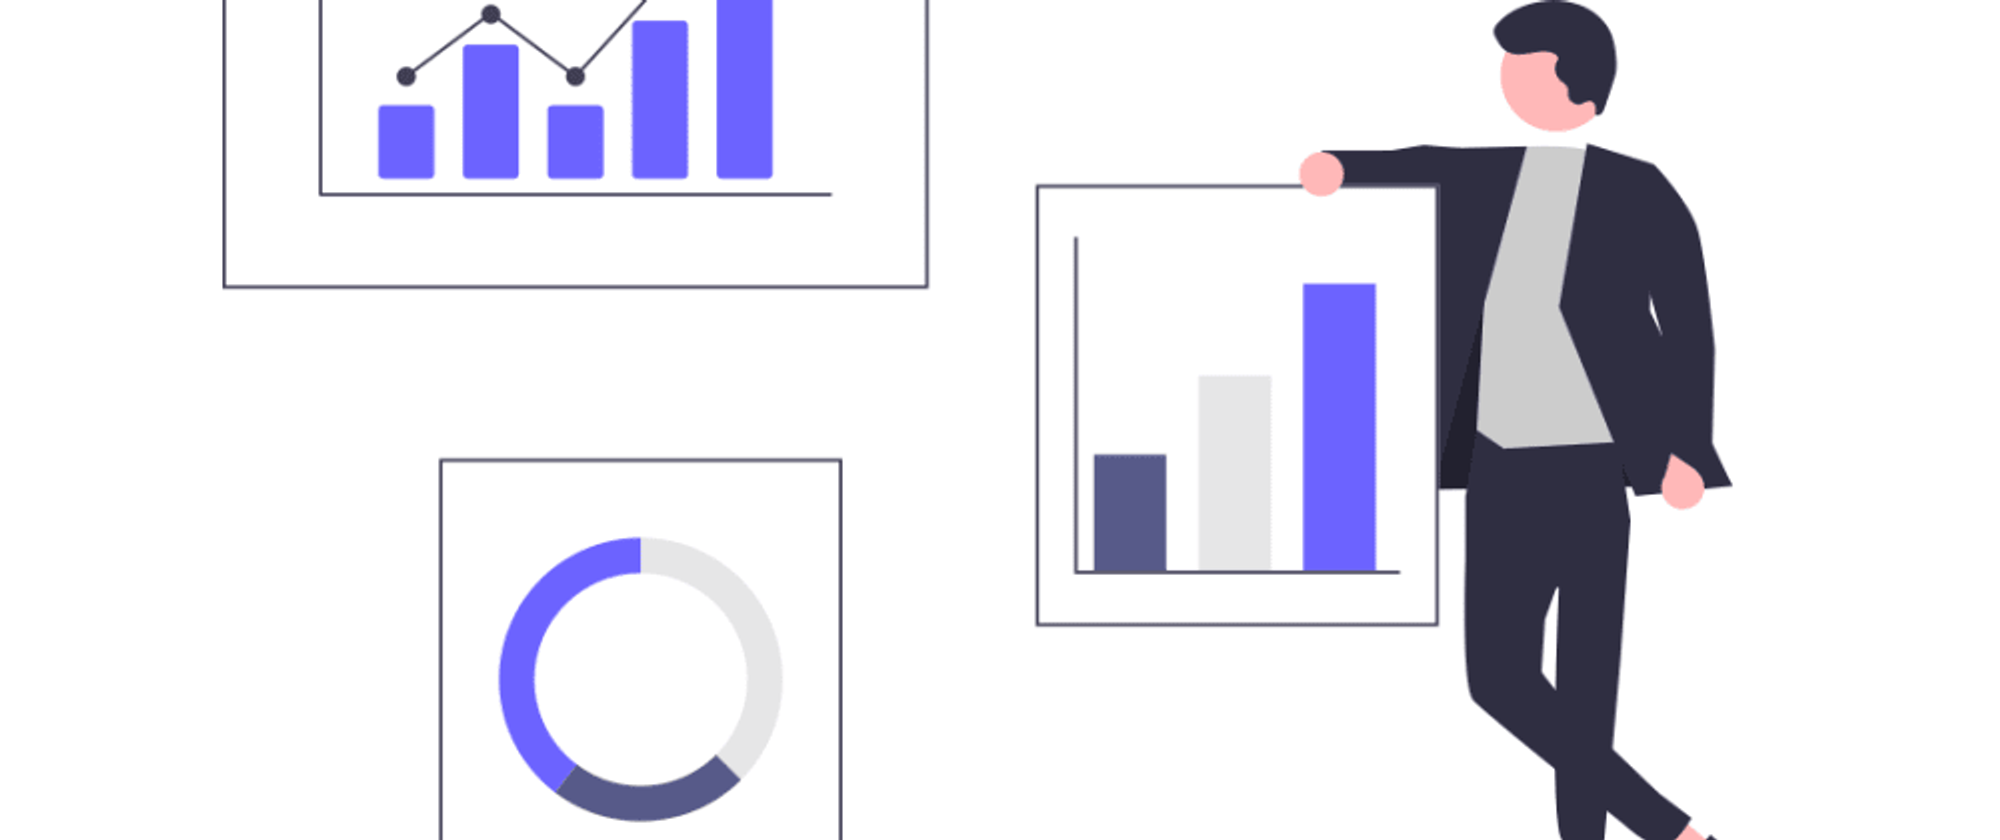 Jira: one easy solution to generate custom reporting